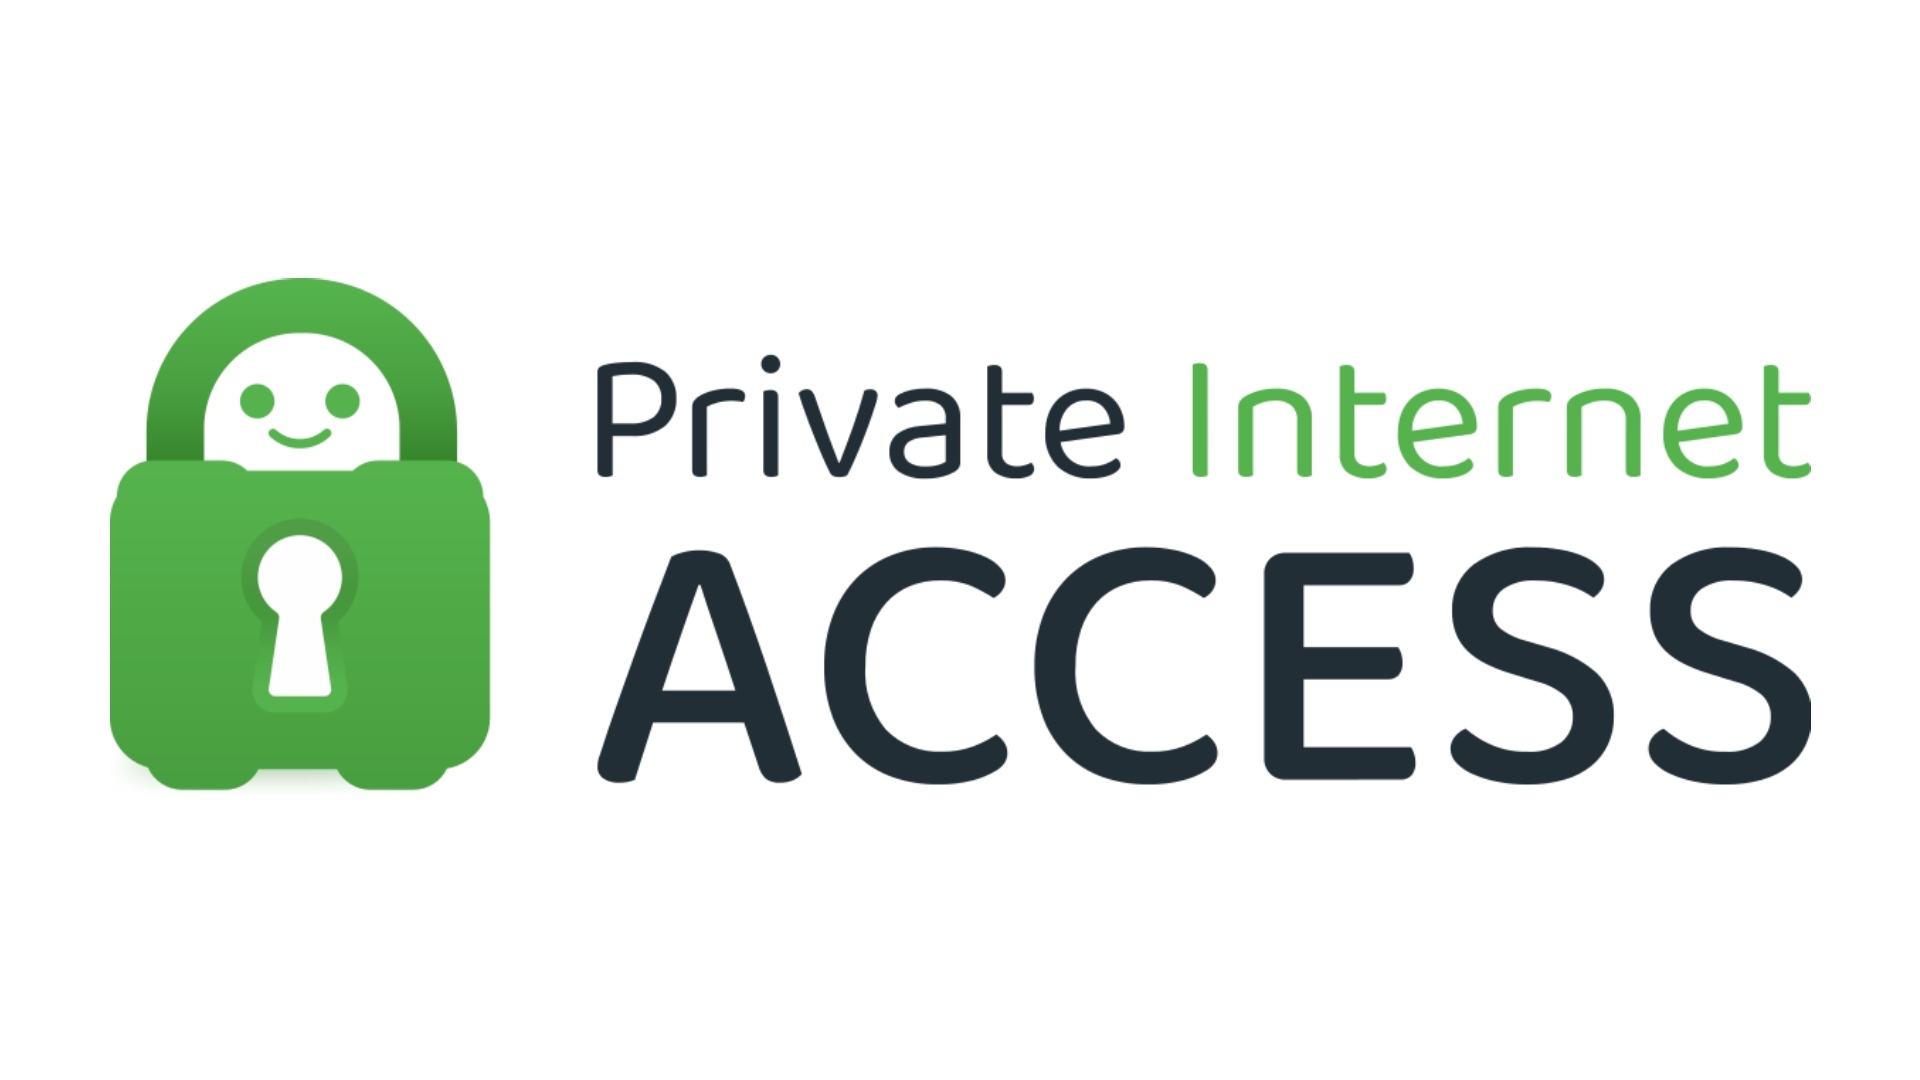 Best GTA Online VPN: Private Internet Access. Image shows the company logo.